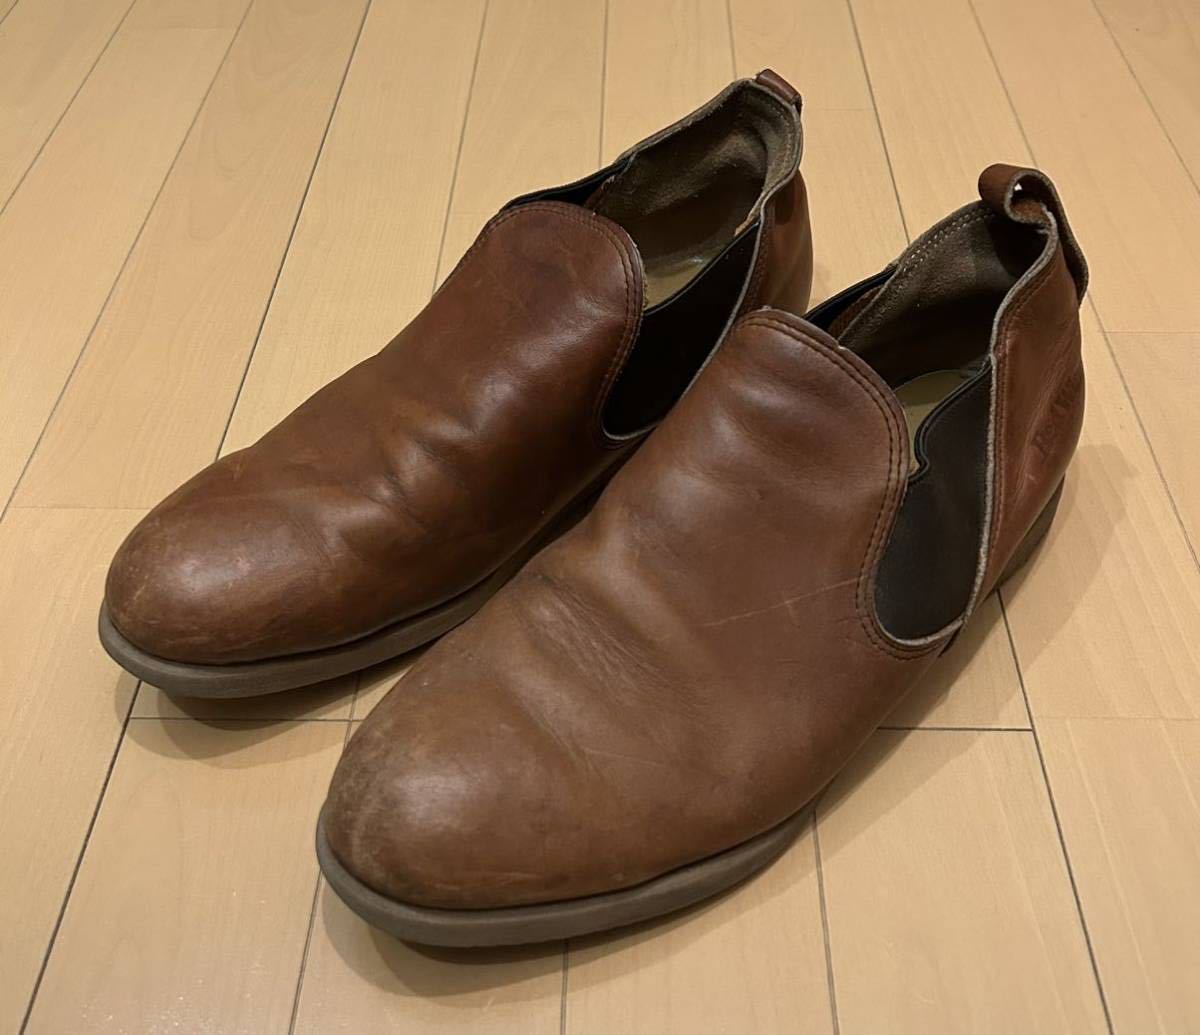 RED WIND Shoes Side Gore Boots Low Cut レッドウィング サイドゴア ローカット 希少 Rare レア Made in USA アメリカ製 ROMEO ロメオ型？_画像3